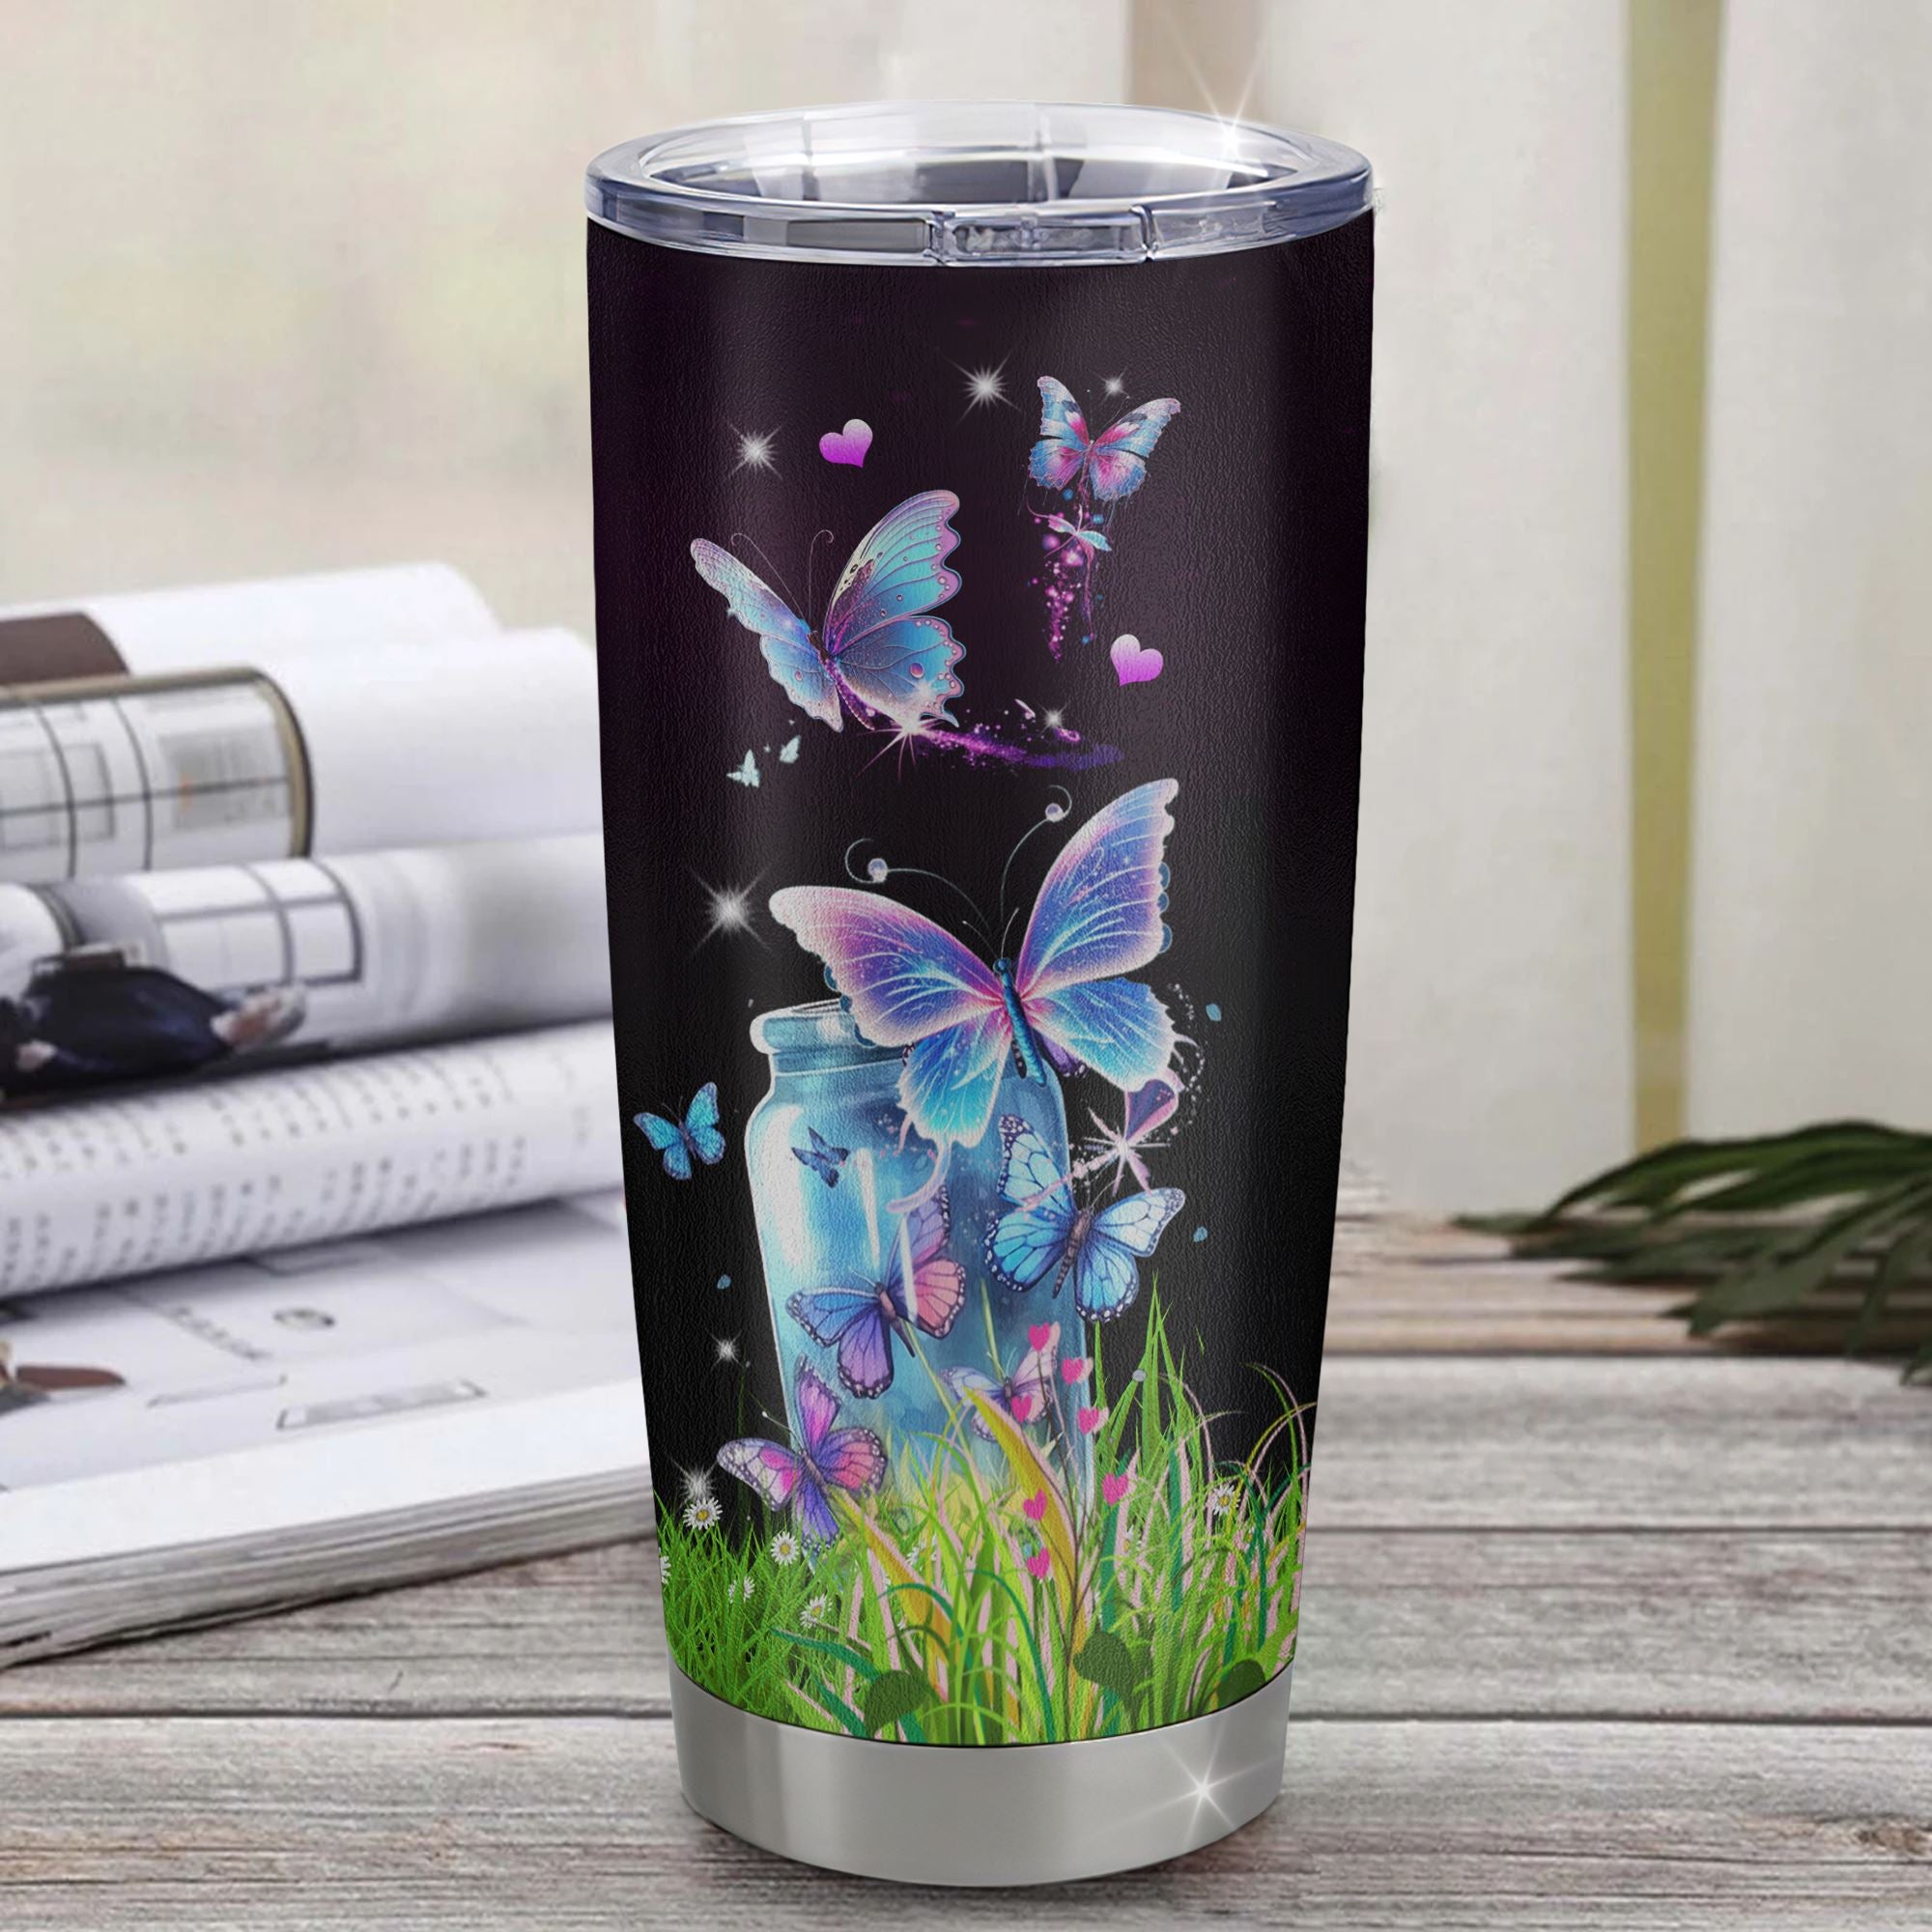 18 & Fabulous 20oz Stainless Steel Tumbler 18 Birthday Decorations for Girls, 18th Birthday Gifts for Girls, Happy 18th Birthday Decorations for Girls